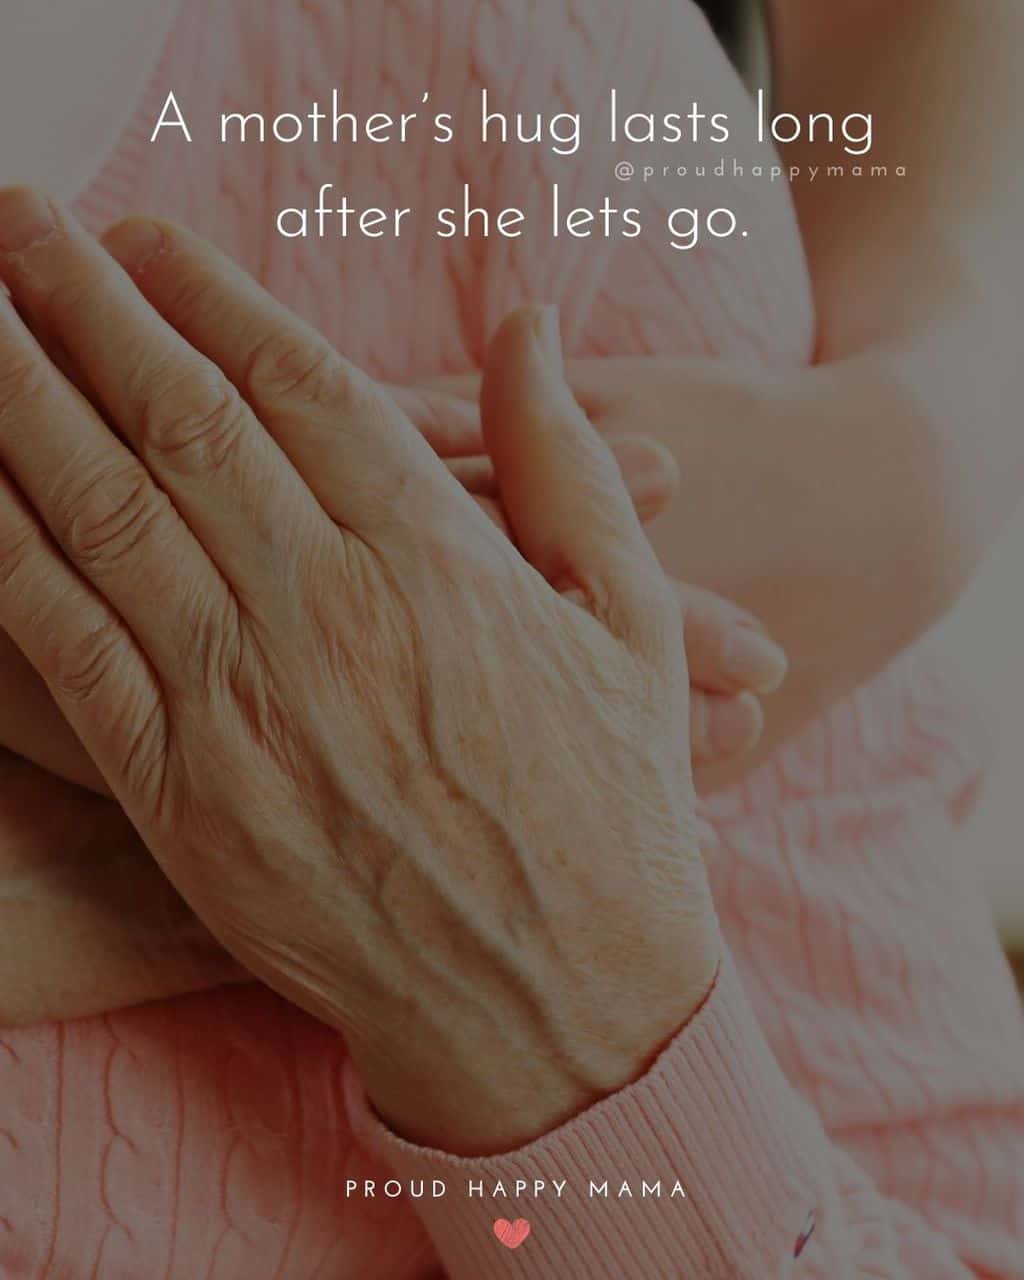 50+ Heartfelt Missing Mom Quotes About Losing A Mother